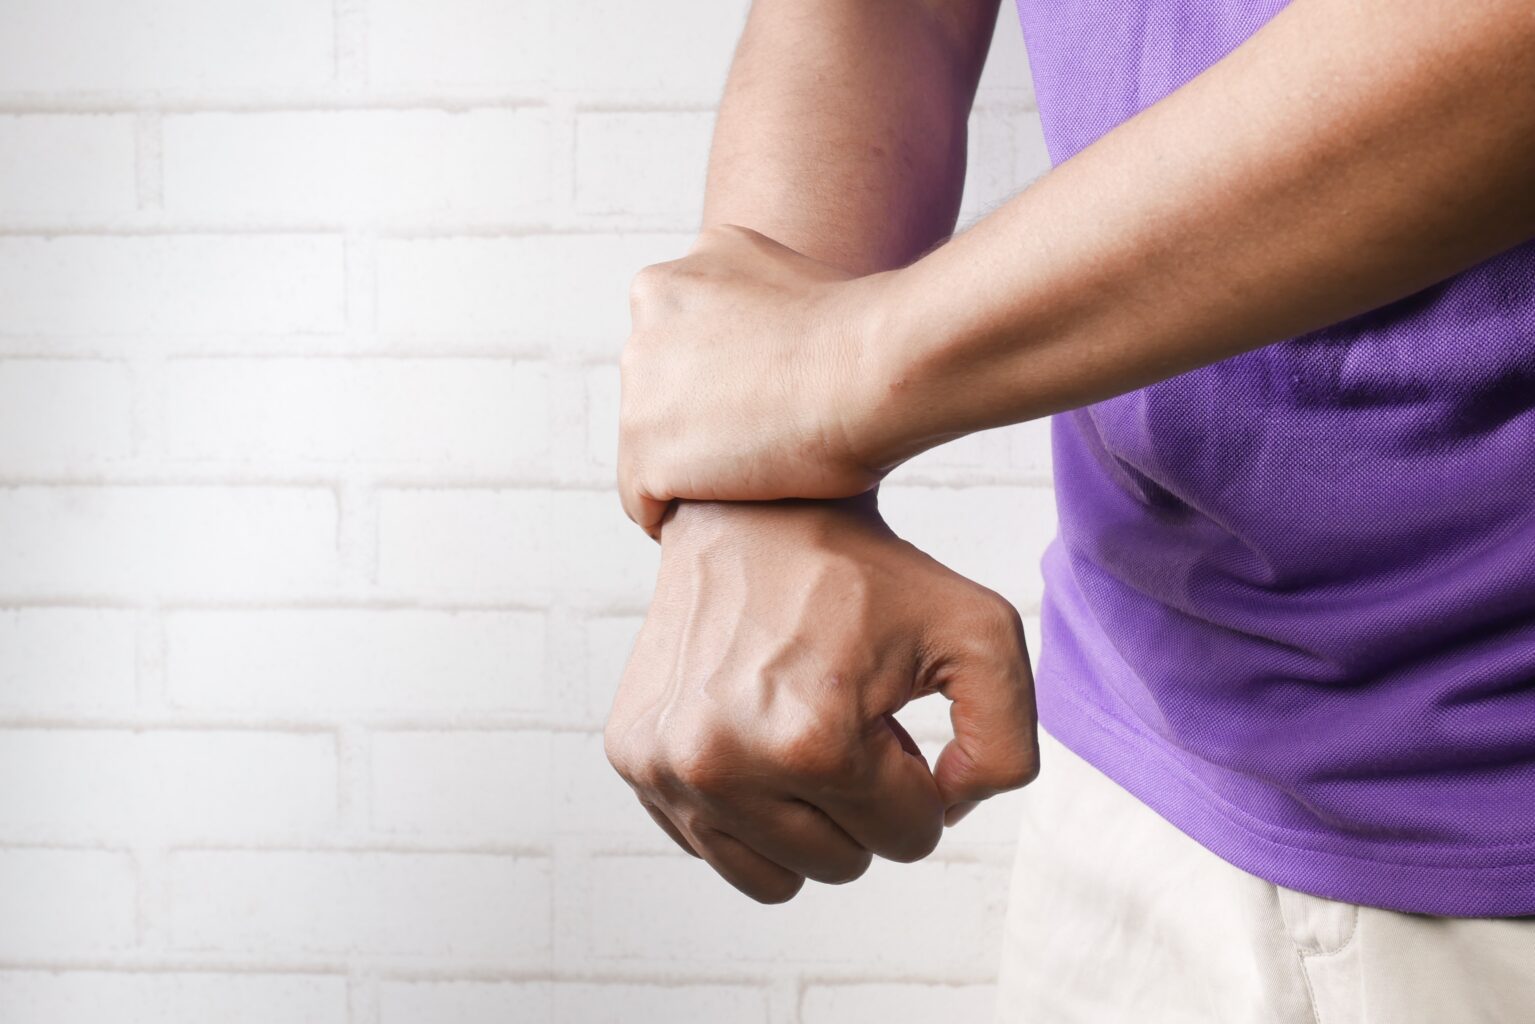 Person holding their other wrist in pain while fist is clenched